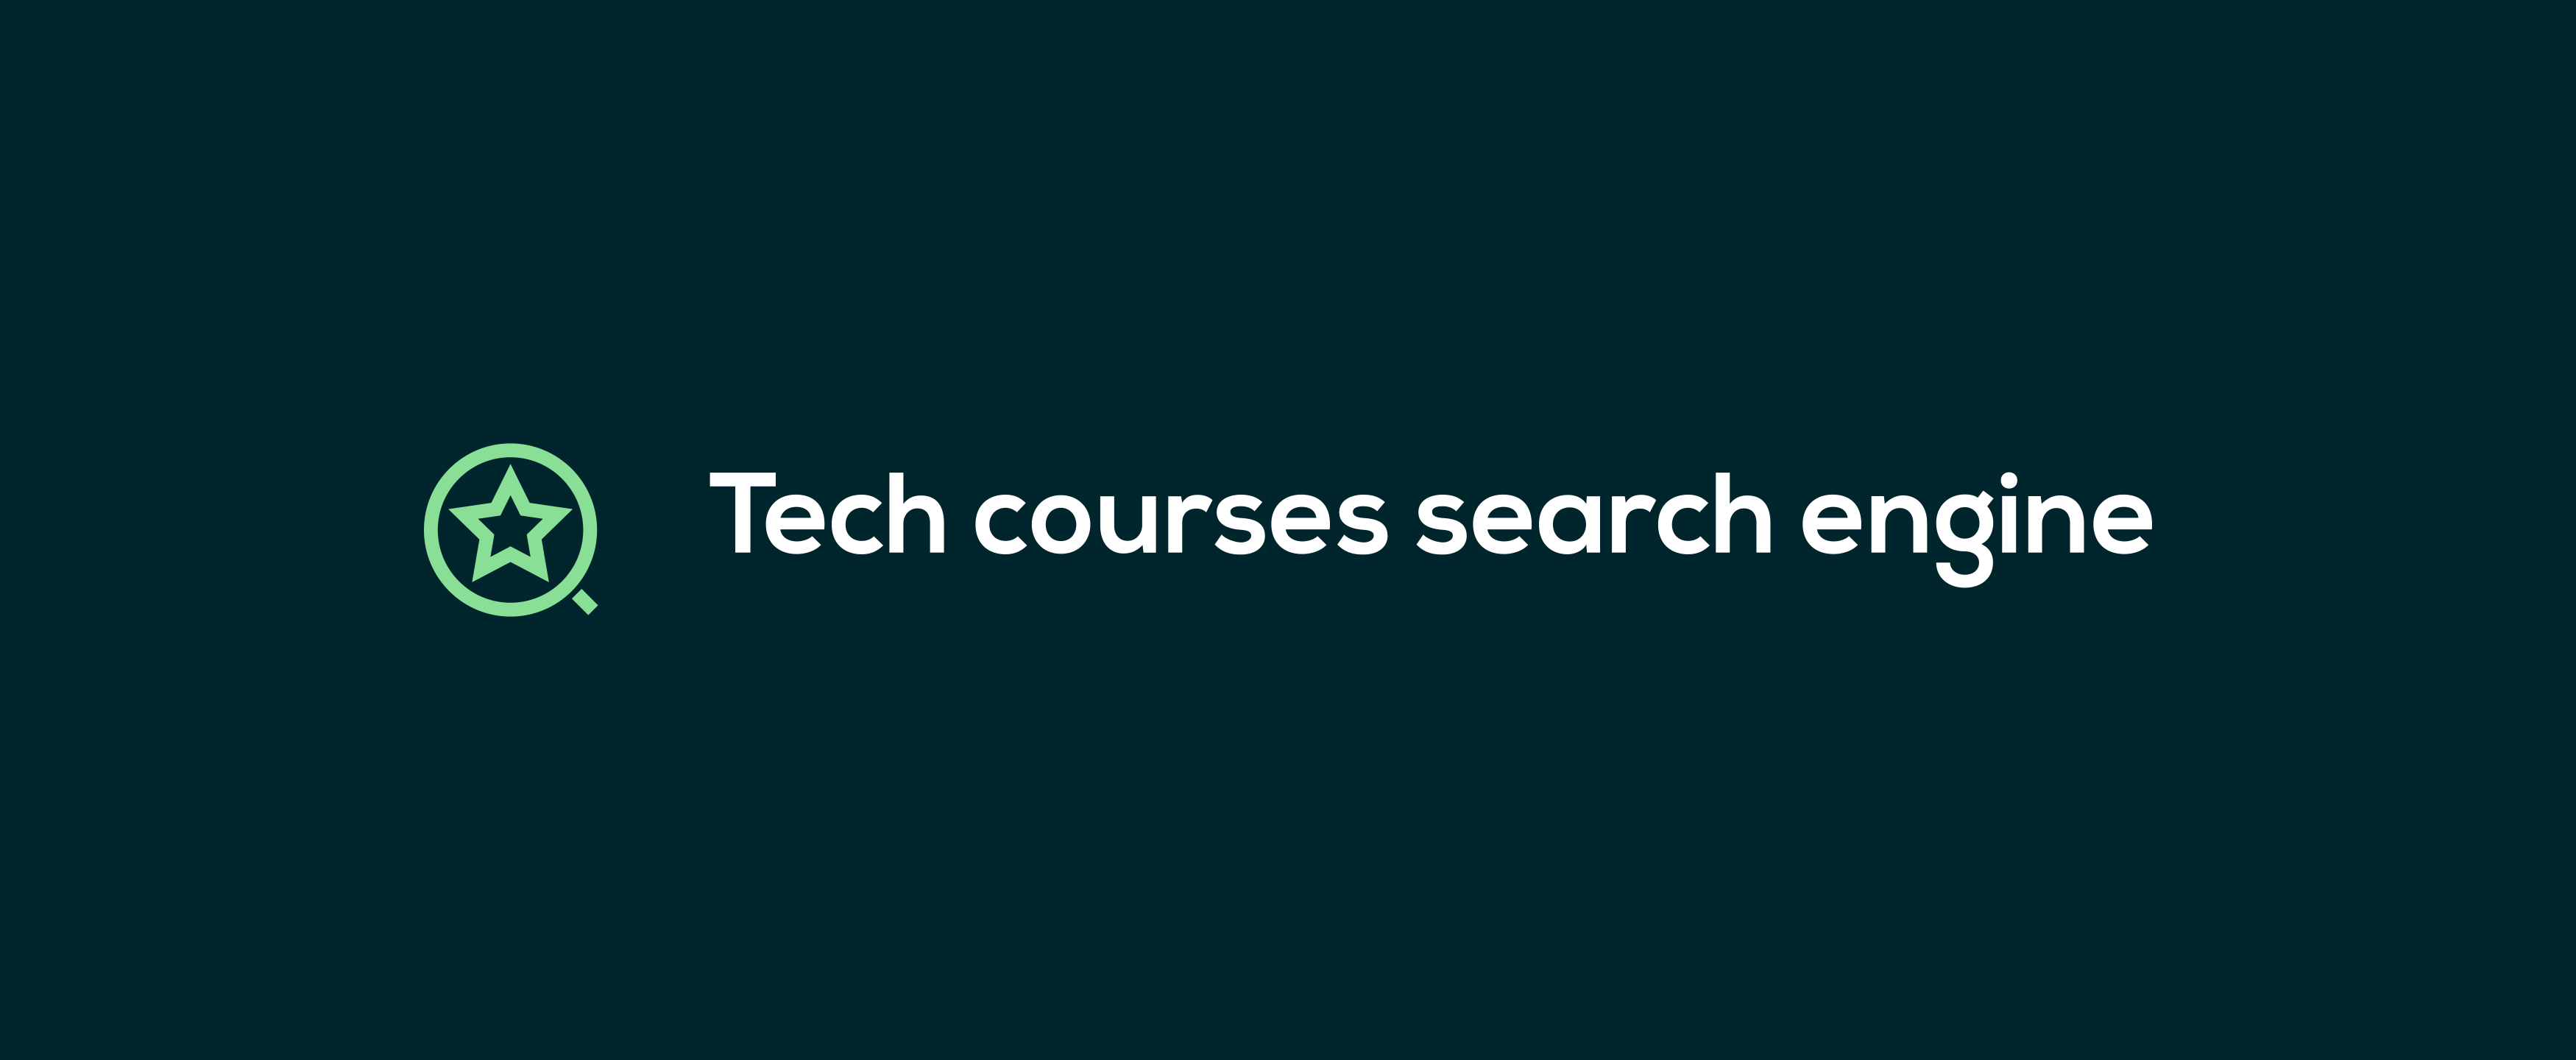 tech-courses-search-engine